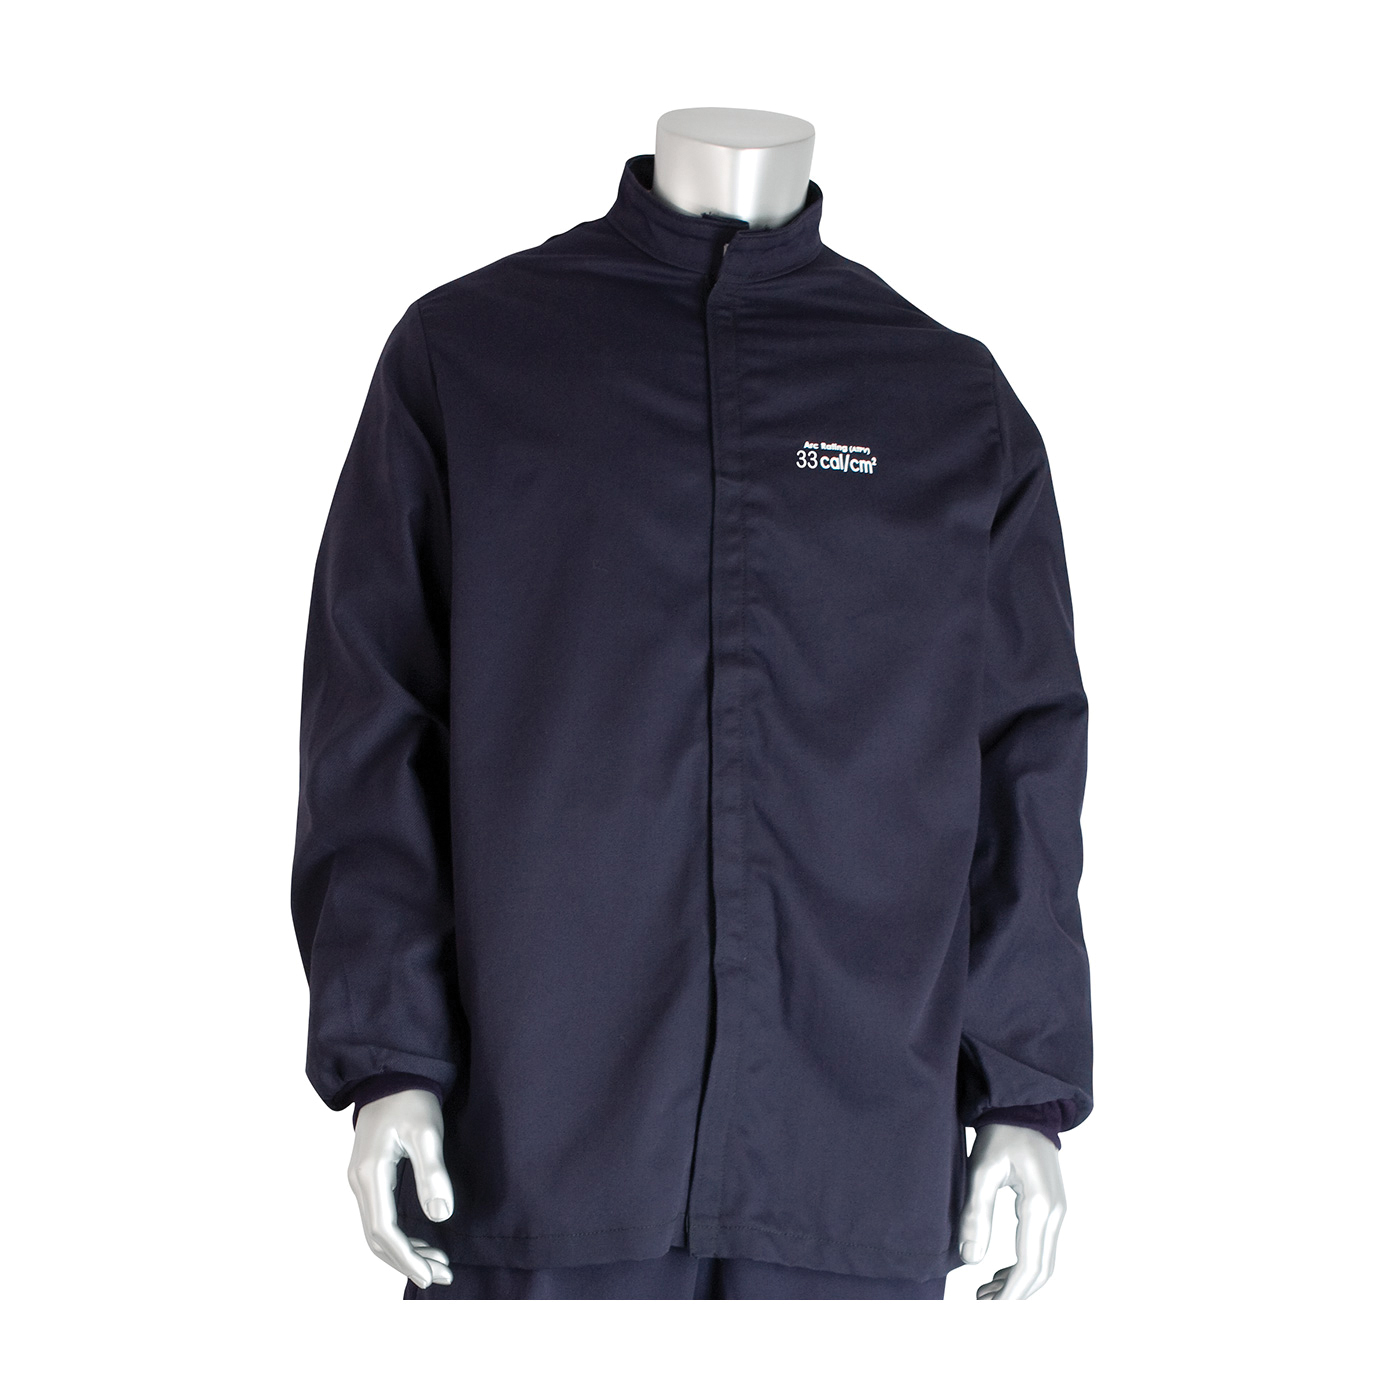 PIP® 9100-52680/M Arc and Flame Resistant Jacket, M, Navy, Westex® UltraSoft® 88% Cotton 12% High Tenacity Nylon, 40 to 42 in Chest, Resists: Arc and Flame, ASTM F1506-10a, ASTM F2178-12